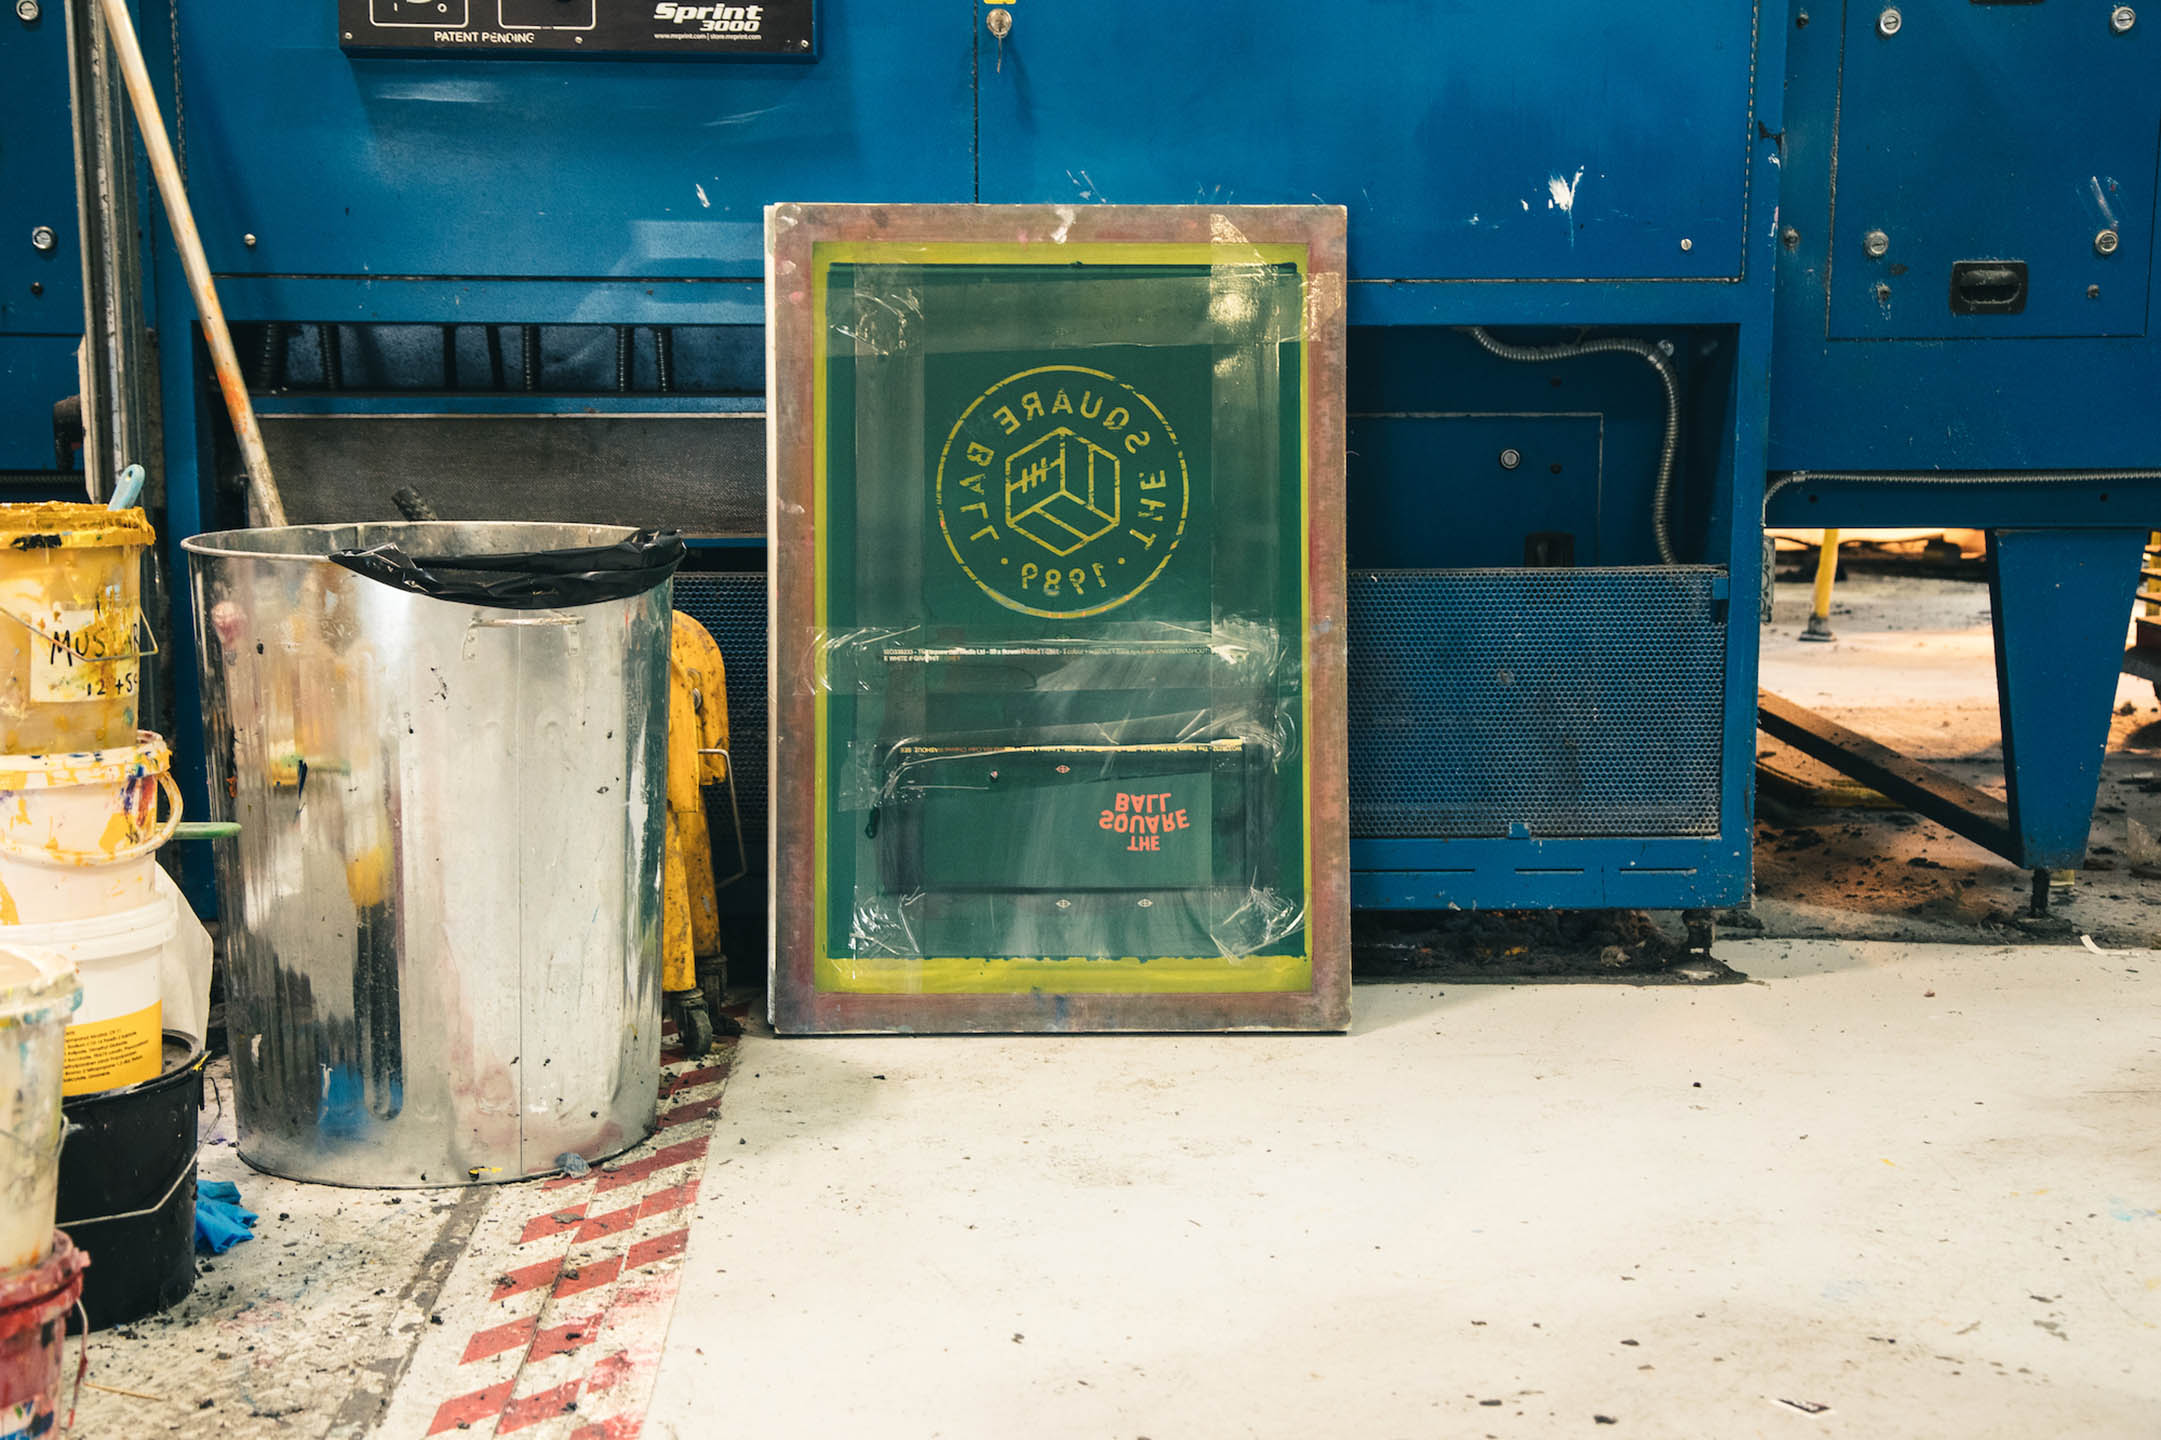 The Square Ball logo is seen on a screenprinting frame, propped up on the floor of a printer's shop.